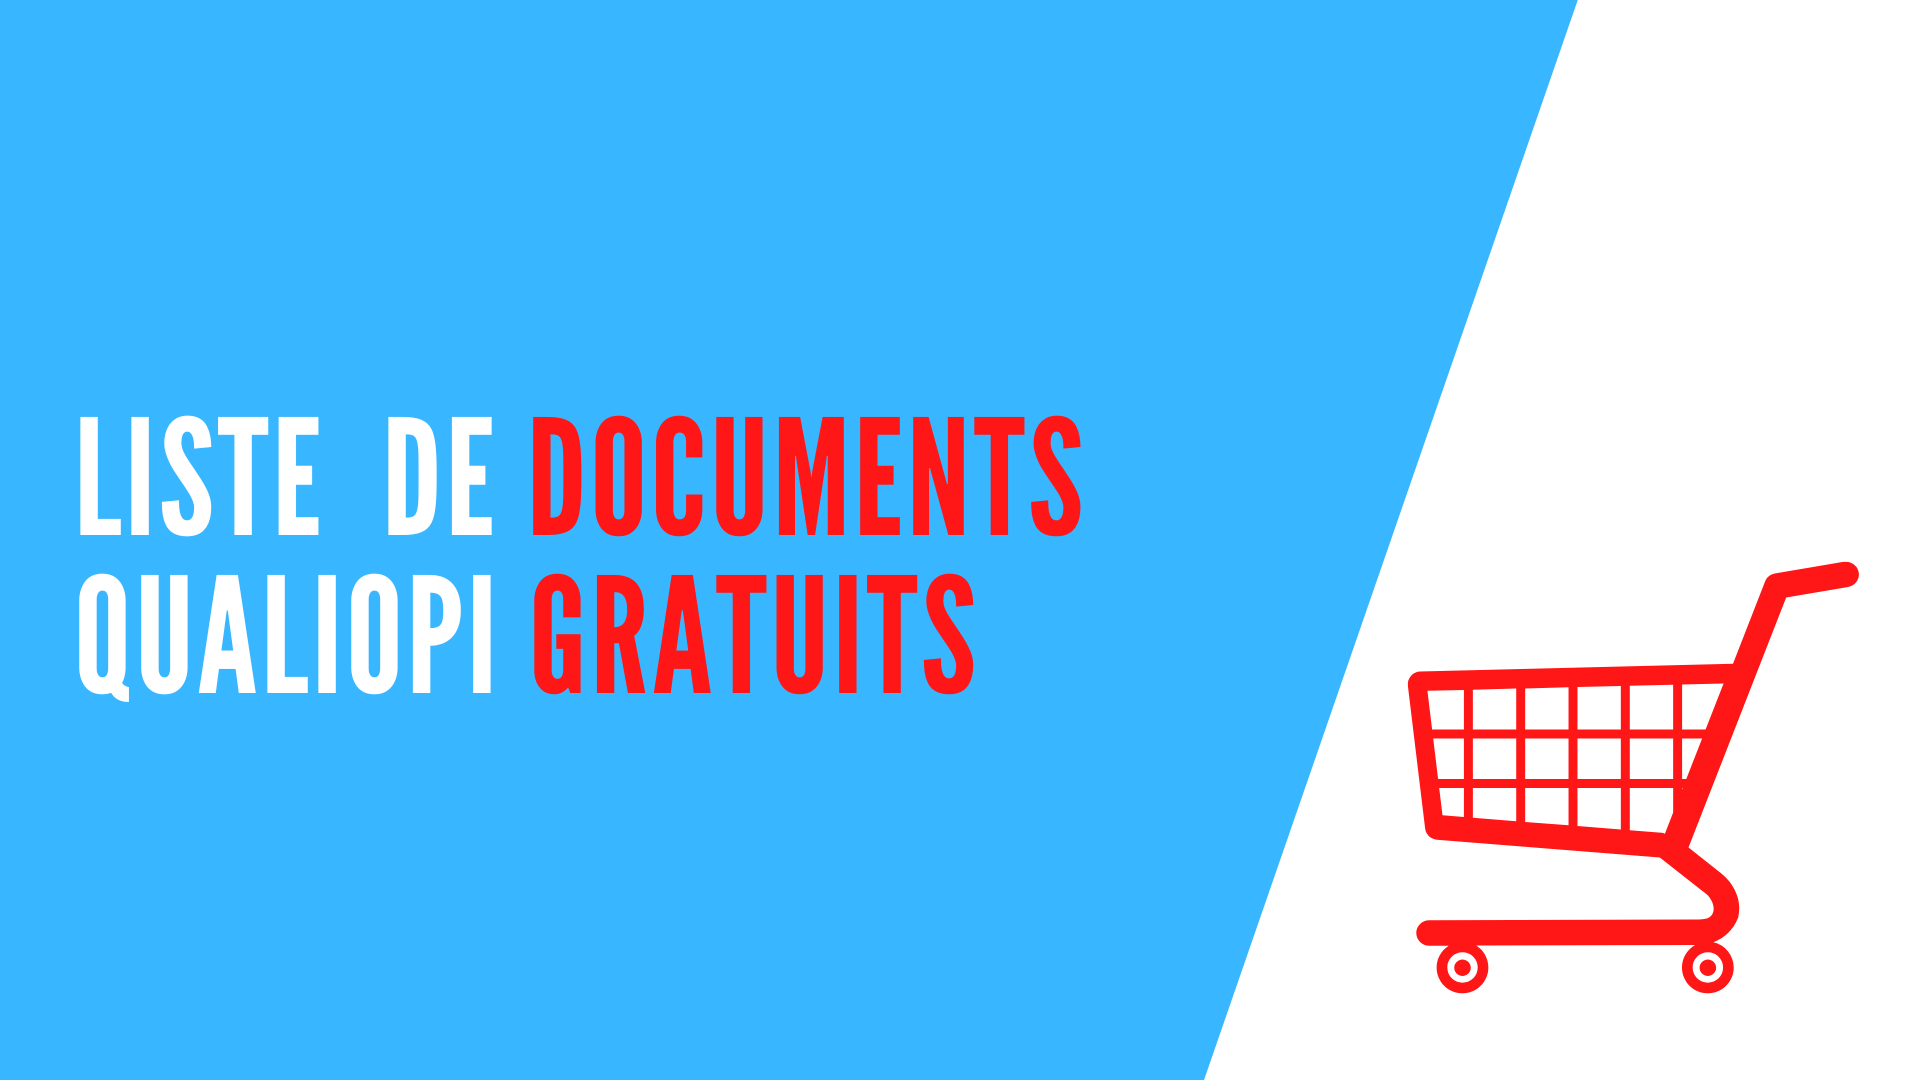 You are currently viewing Liste de documents Qualiopi gratuits